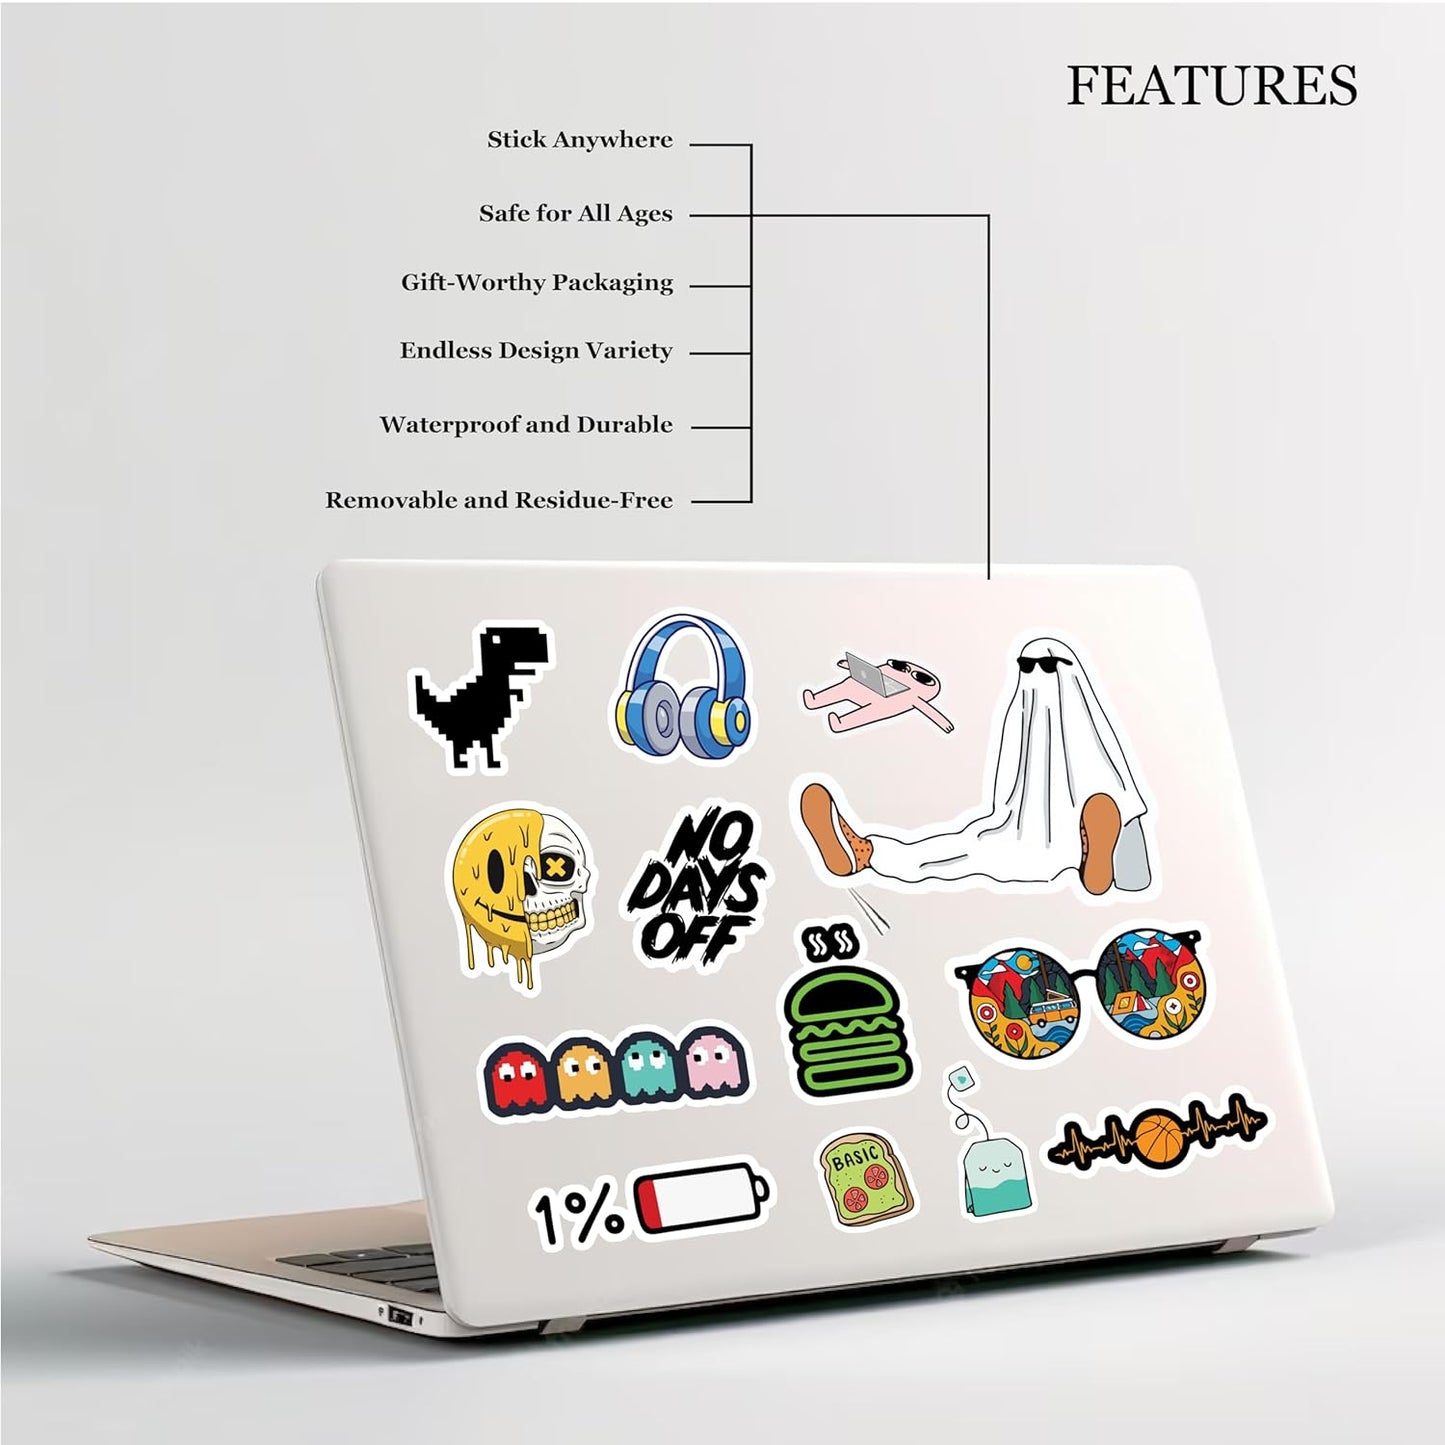 Reusable Waterproof Vinyl Stickers Glossy Finished for Decoration Laptop Mobile Scrapbook Car Bike Almira(Pack of 50)- Pack 1